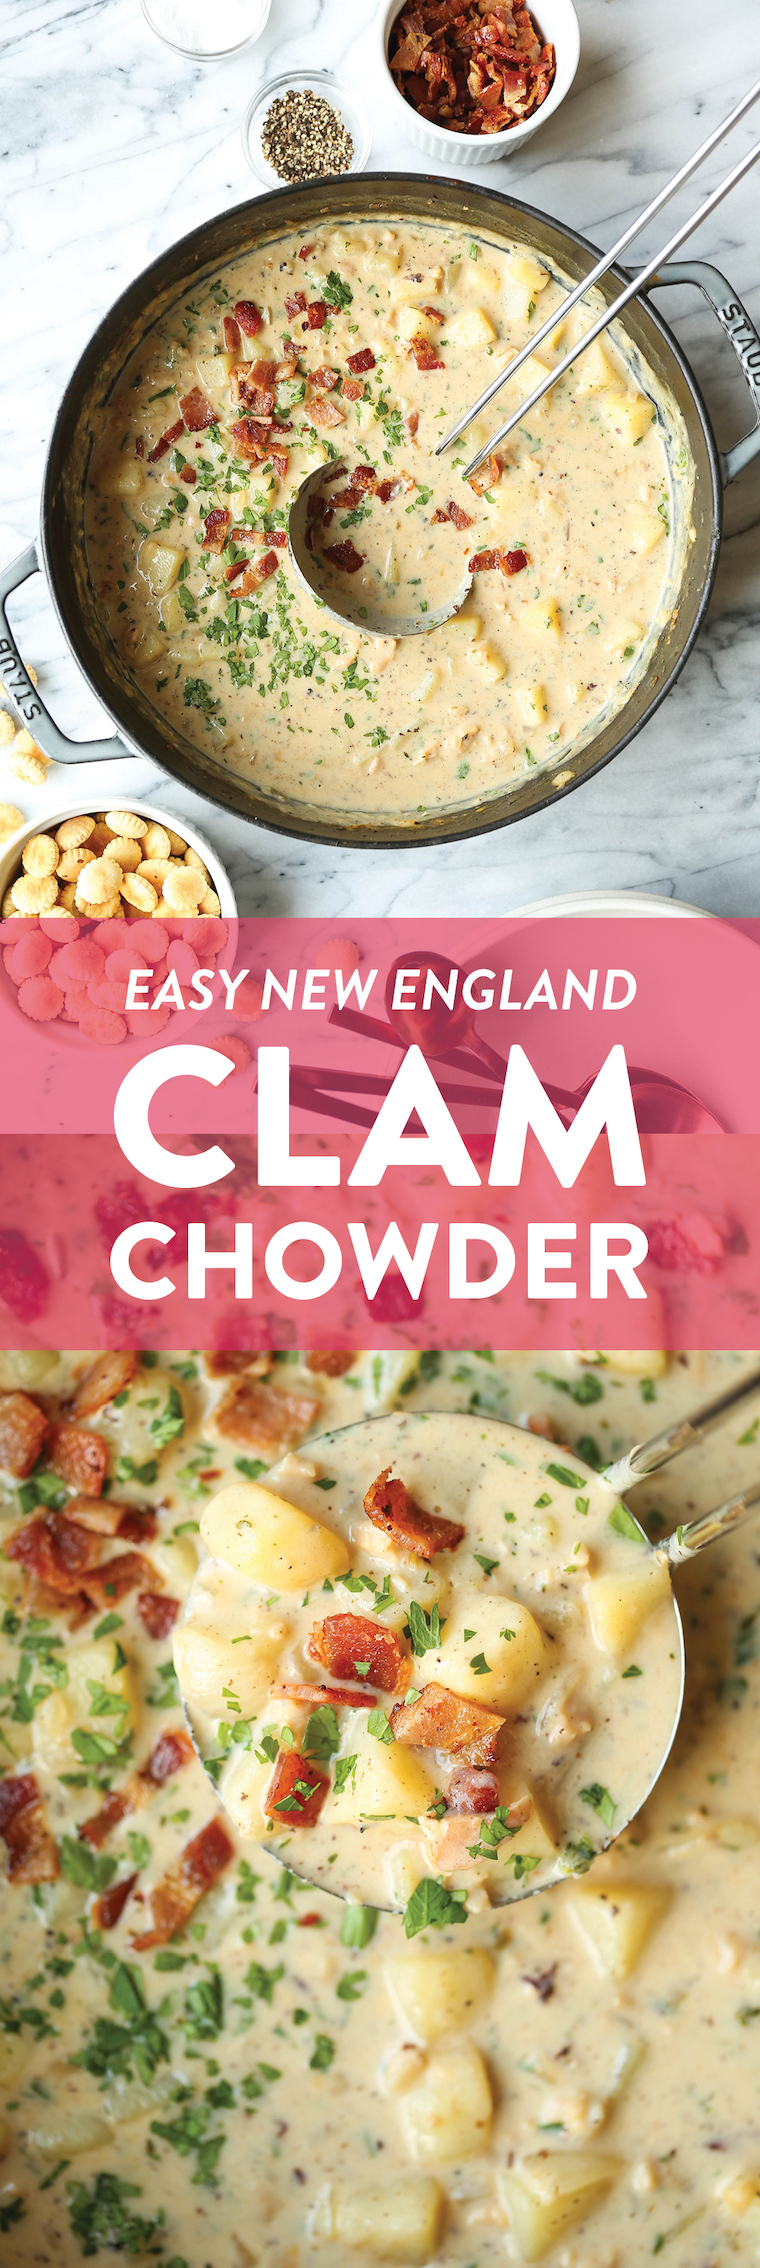 Easy Clam Chowder - Clam chowder is easier to make than you think - and the homemade version is unbelievably creamy, flavorful and chockfull of clams!